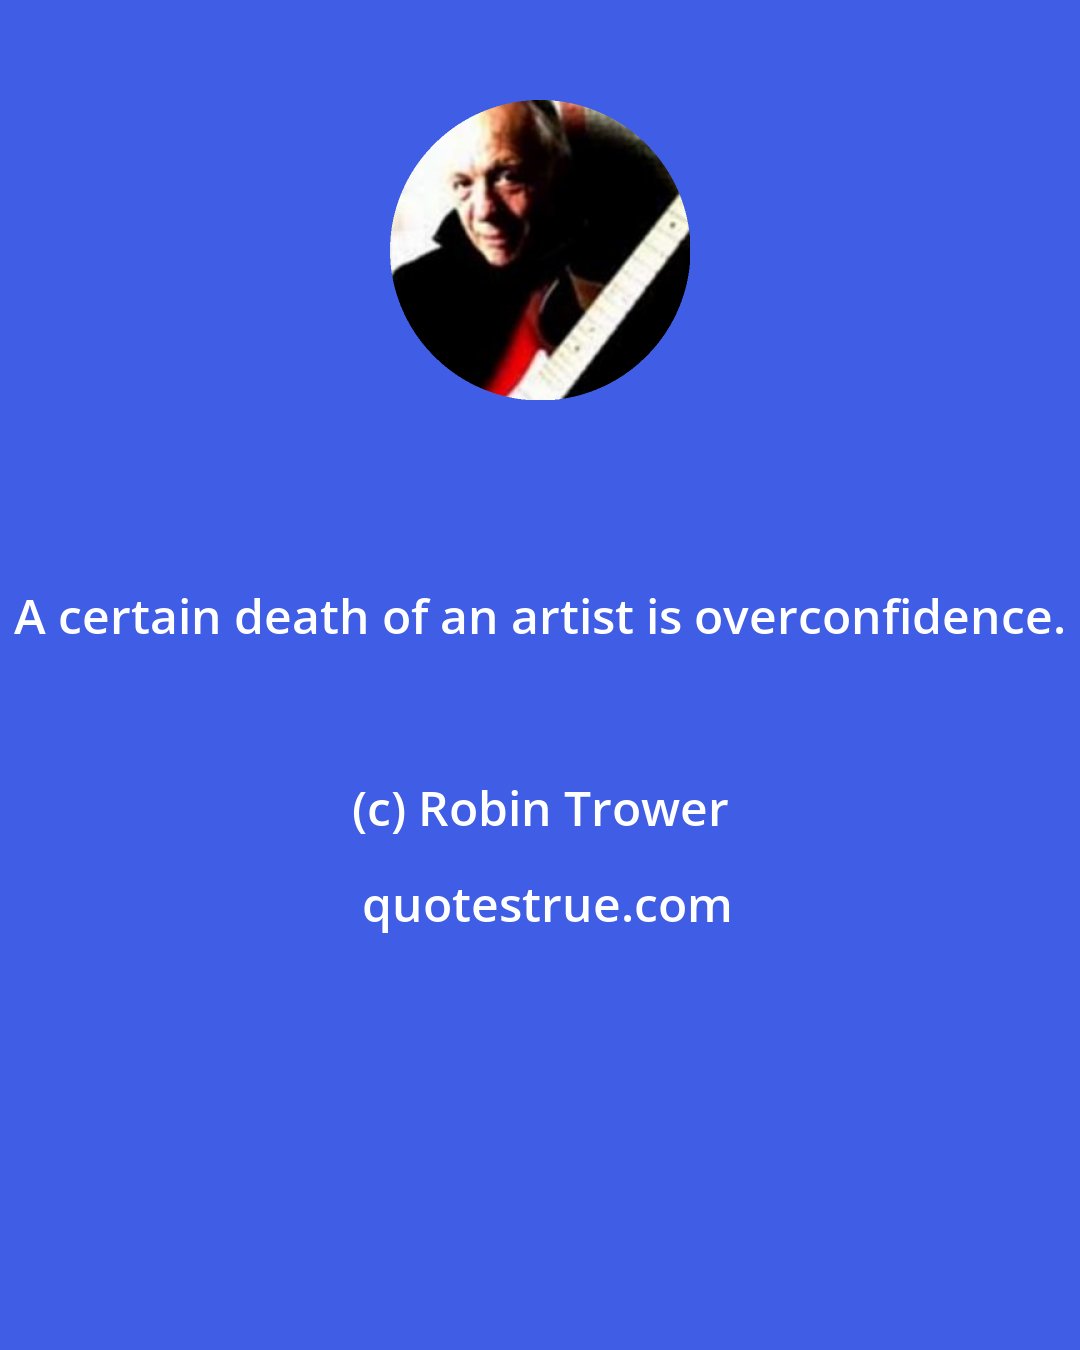 Robin Trower: A certain death of an artist is overconfidence.